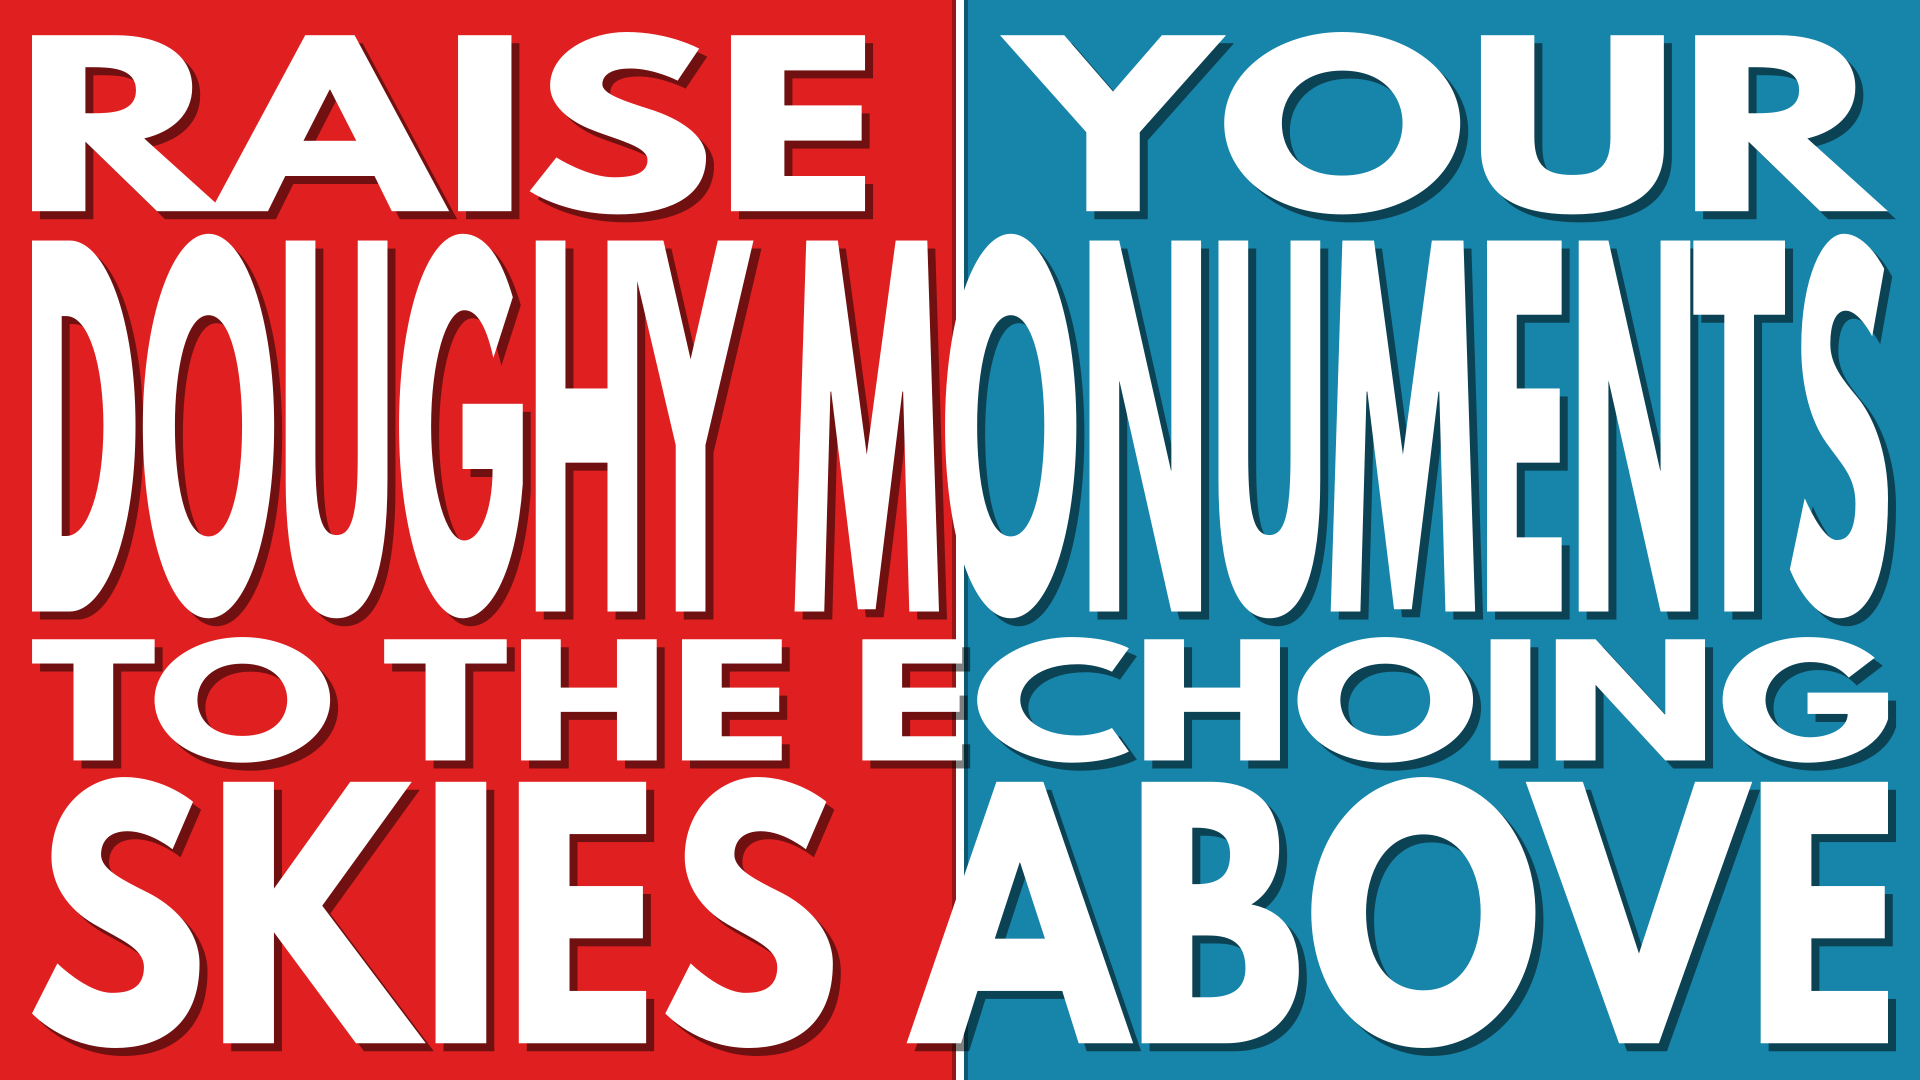 Title screen for the game: 'RAISE YOUR DOUGHY MONUMENTS TO THE ECHOING SKIES ABOVE'.